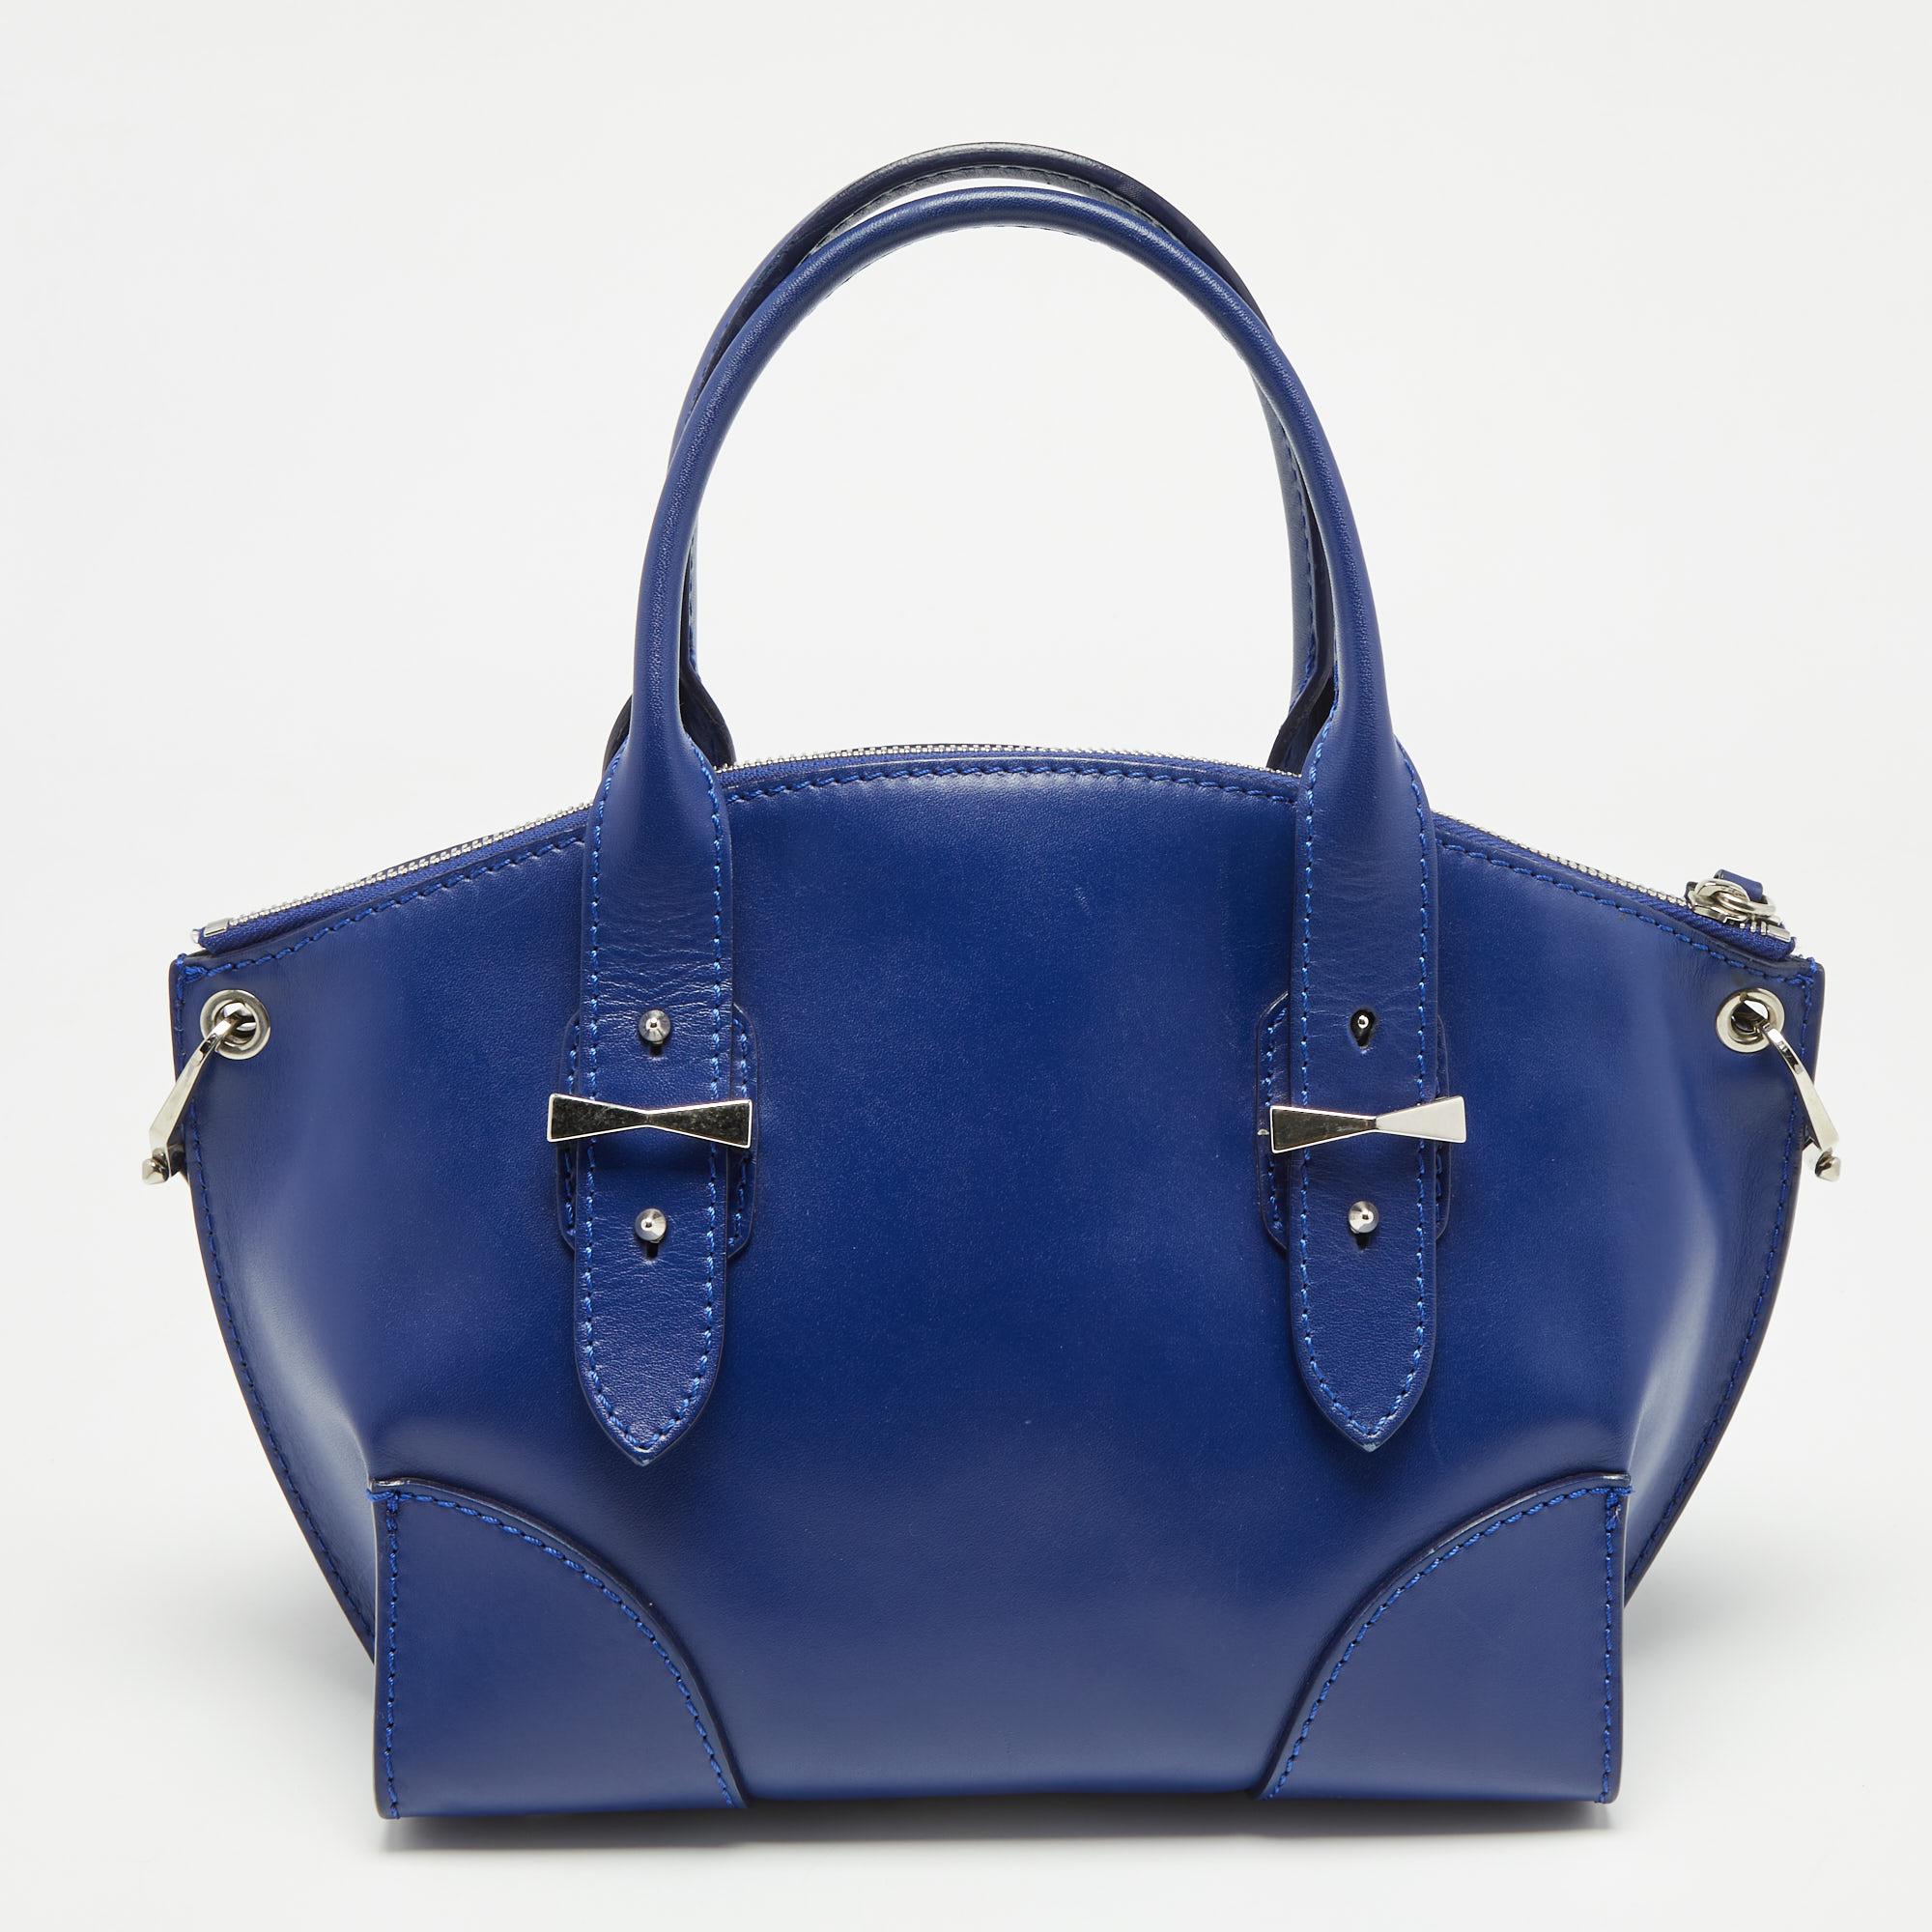 This Legend tote from Alexander McQueen is great for everyday use. It is designed using blue leather, which is embellished with silver-tone hardware. It showcases dual handles and a fabric-lined interior. This tote will make you look classy and